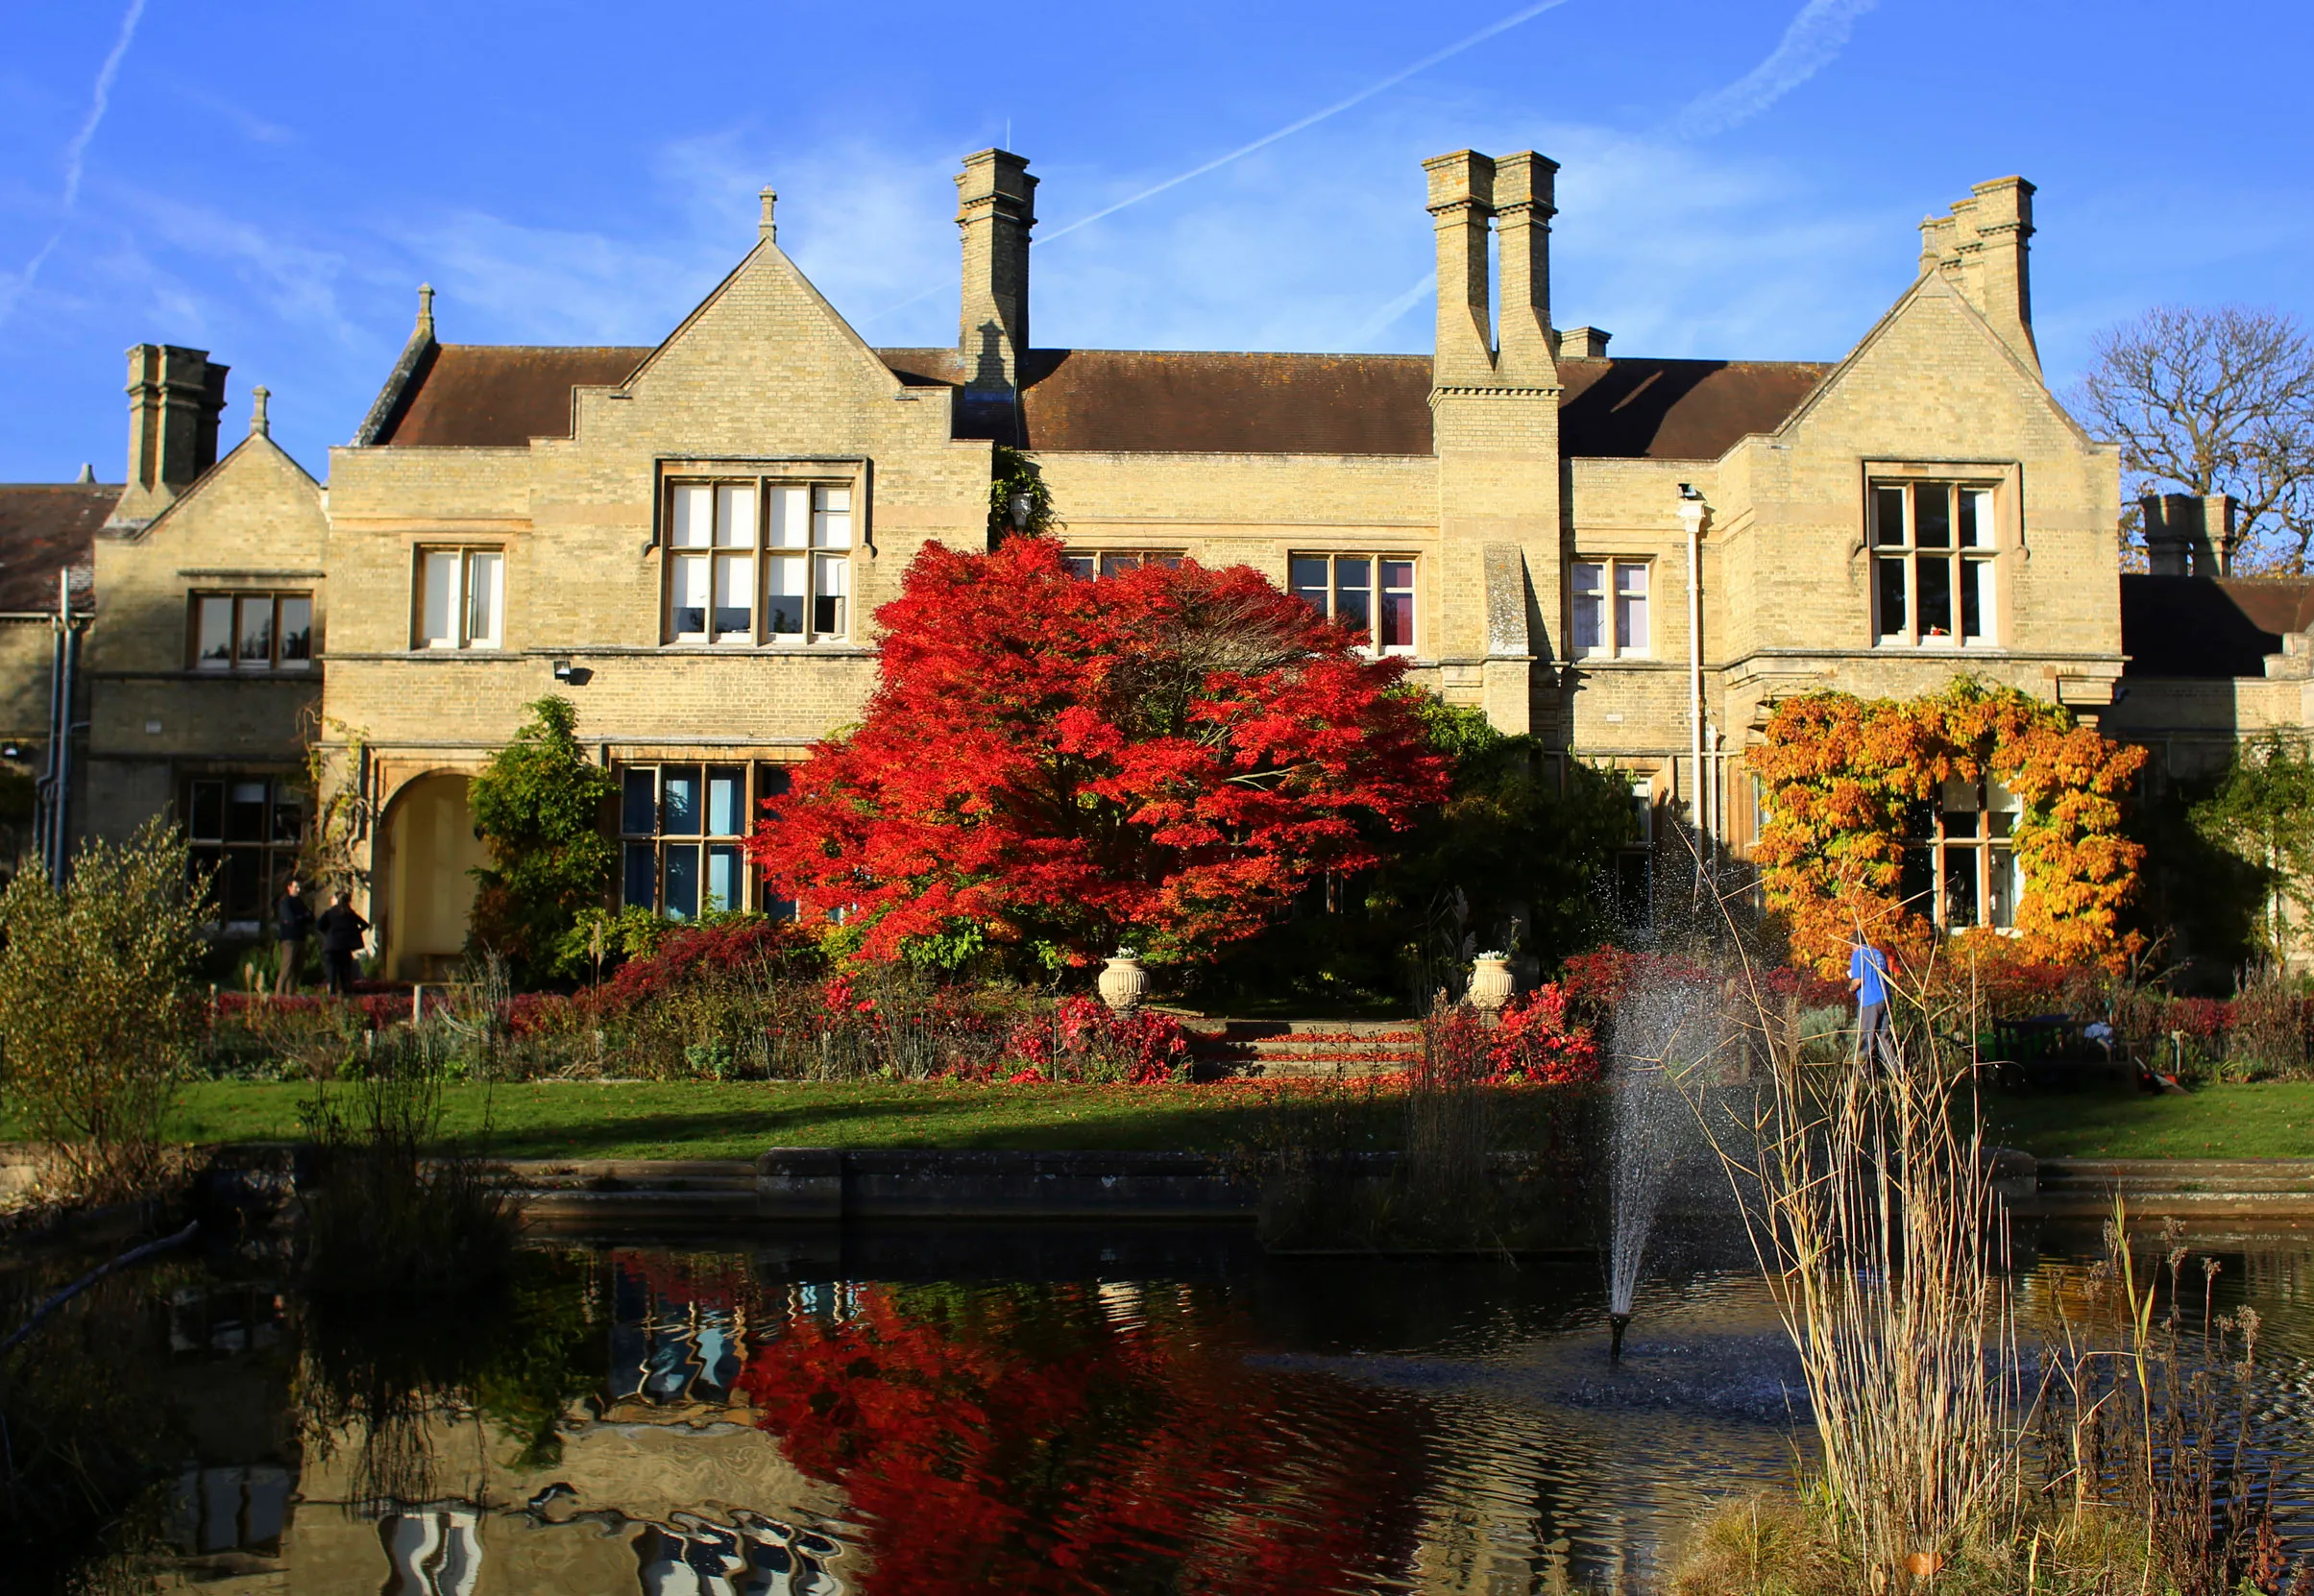 A view of The Lodge from the garden pond. Surrounded by autumnal trees.